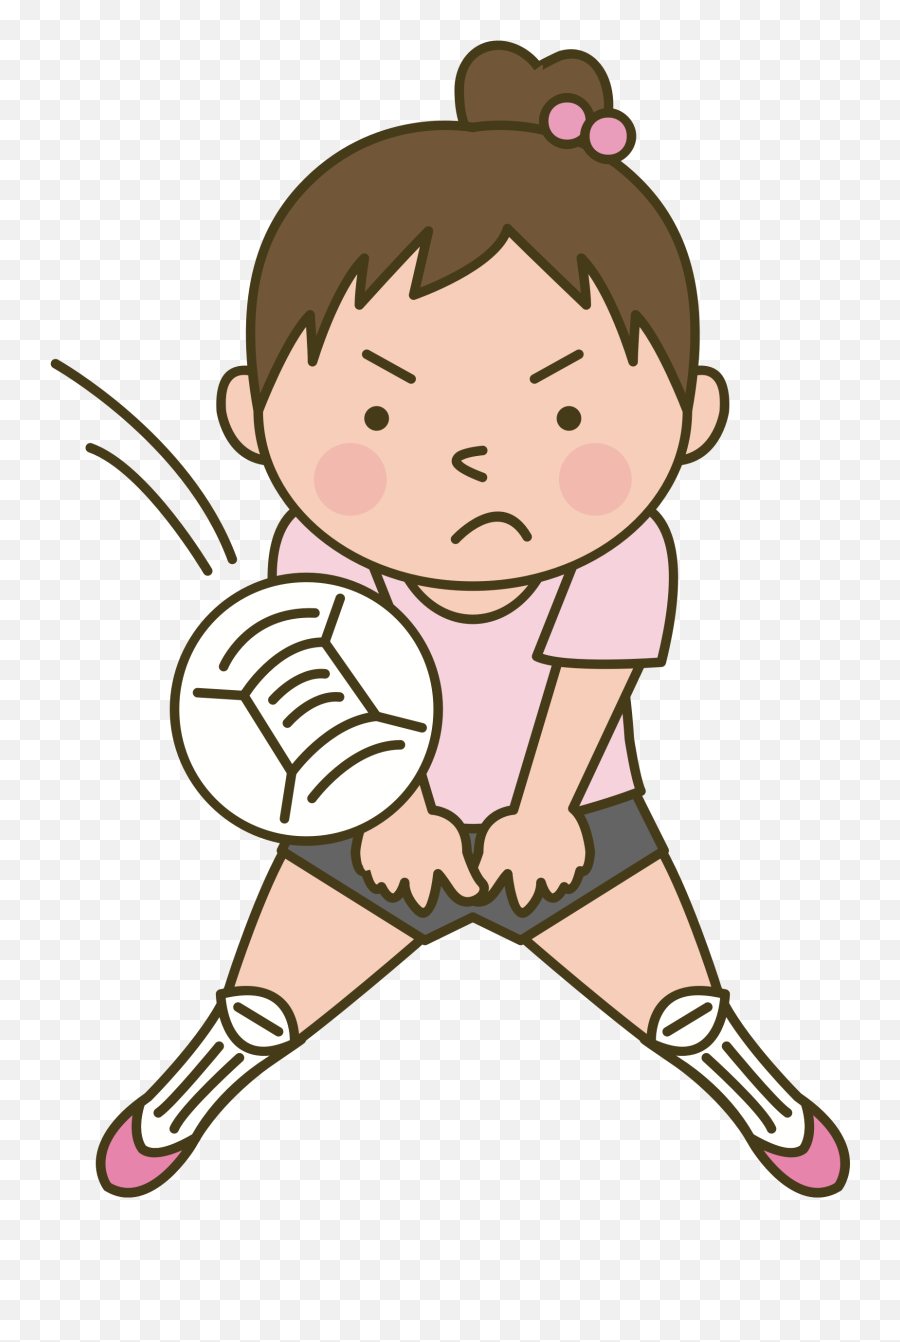 Download Hd Volleyball Png Image - Cartoon Transparent Girl Playing Volleyball Clipart,Volleyball Transparent